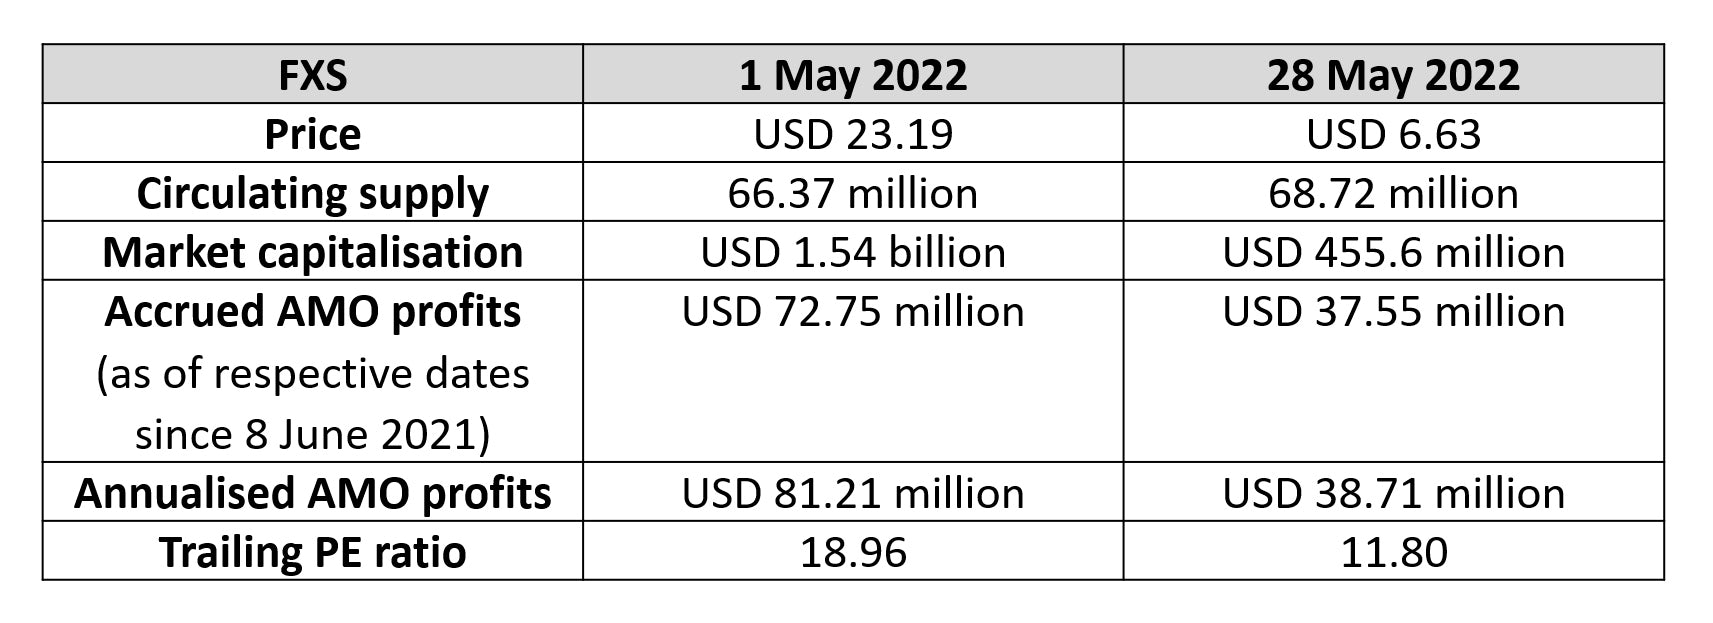 On its website, Frax Finance discloses its accrued profits from its AMOssince 8 June 2021. Nevertheless, the annualised figures in the chart above are